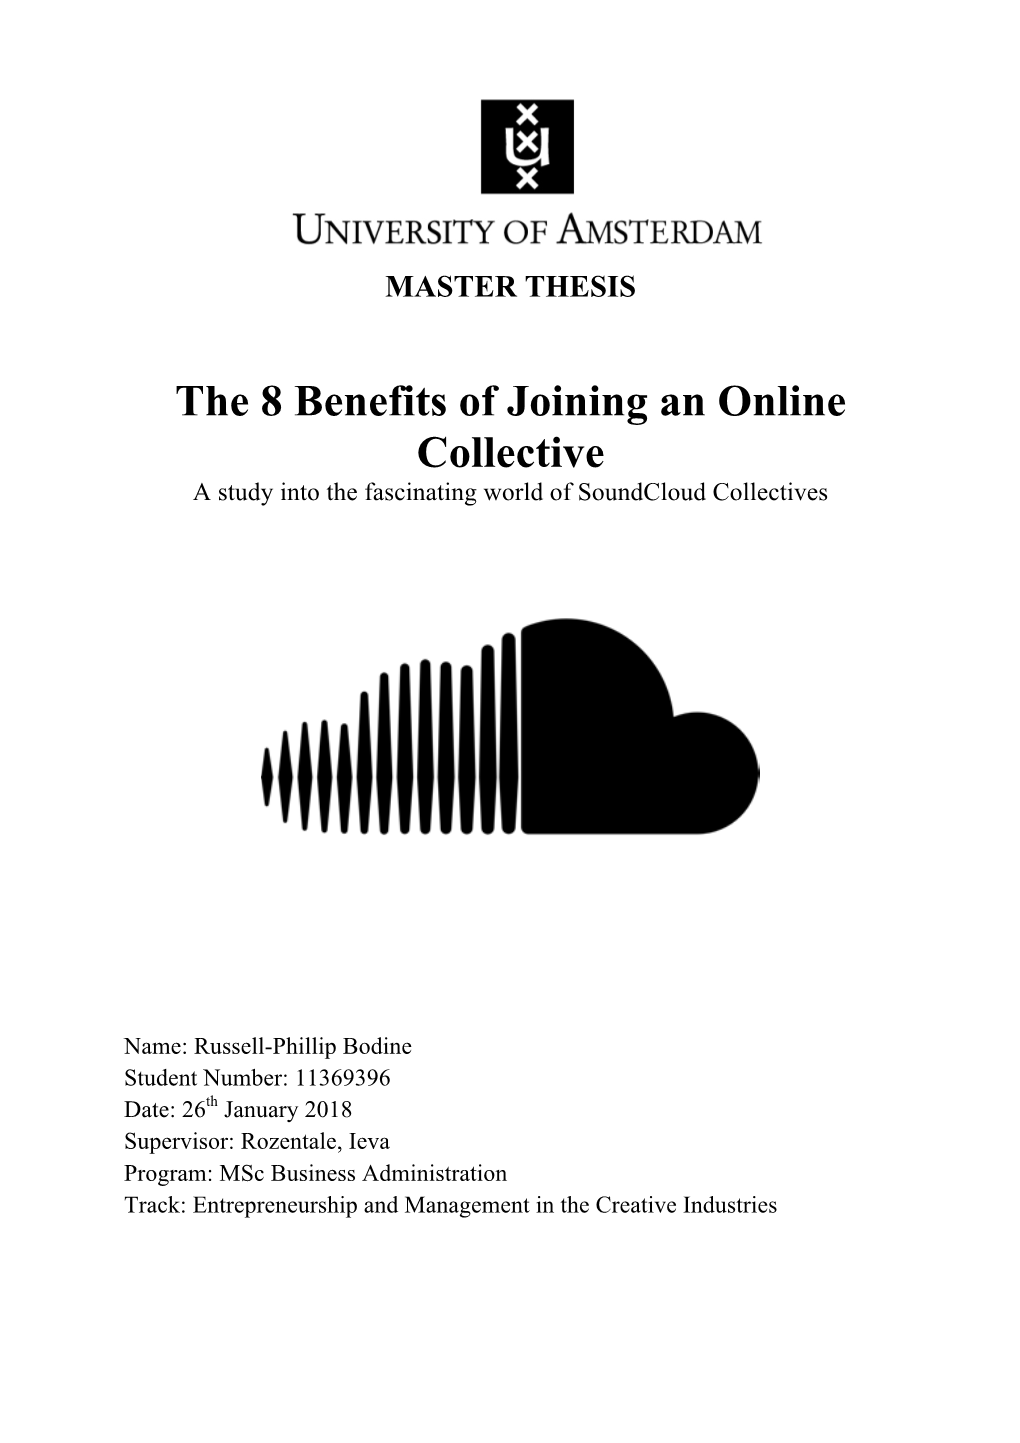 The 8 Benefits of Joining an Online Collective a Study Into the Fascinating World of Soundcloud Collectives